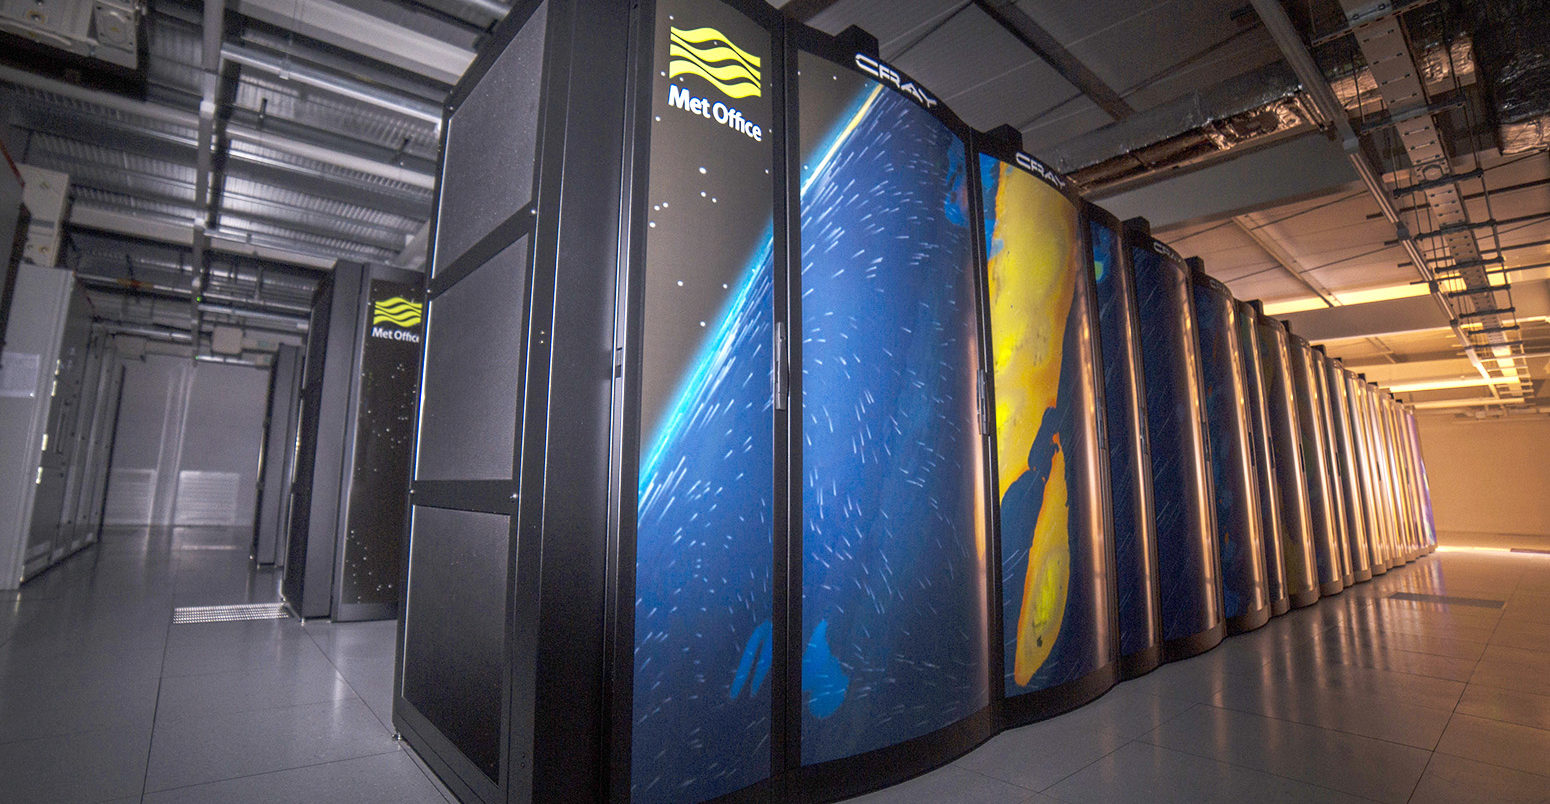 The Cray XC40 supercomputer used by Met Office climate scientists. Credit: Met Office.